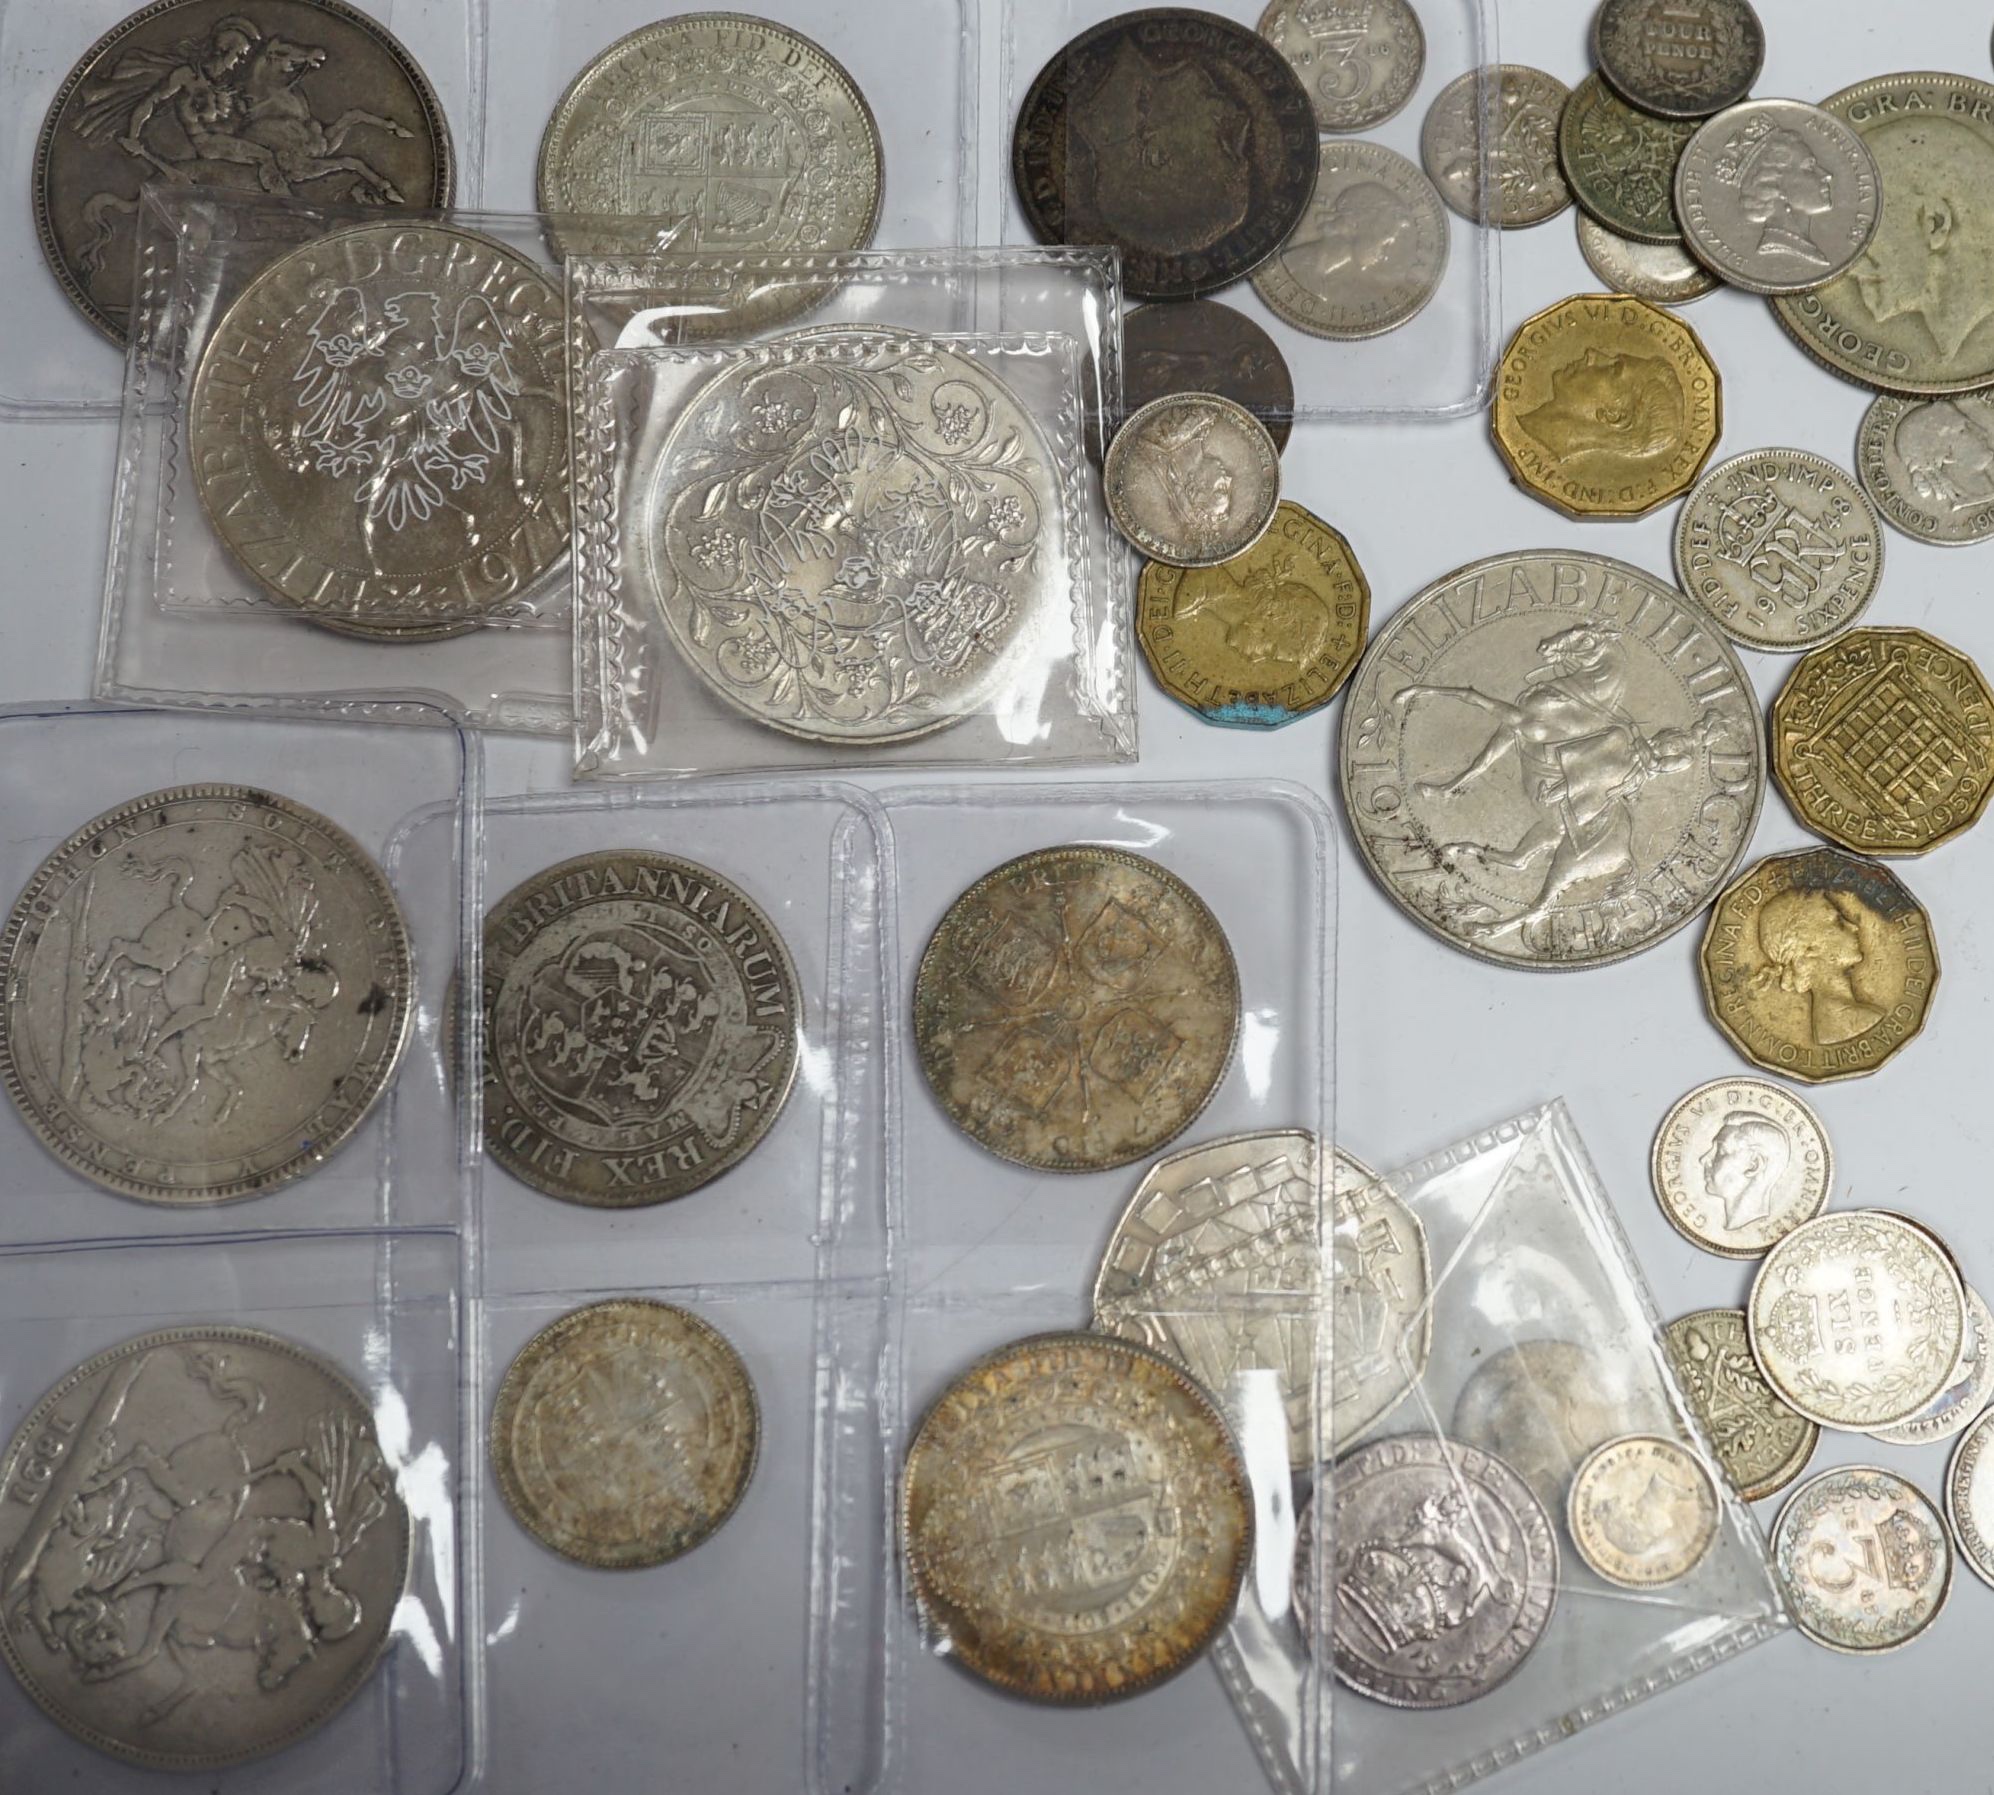 A group of UK coins including 1819, 1821 and 1891 crowns, two 1887 half crowns, 1887 florin, etc.